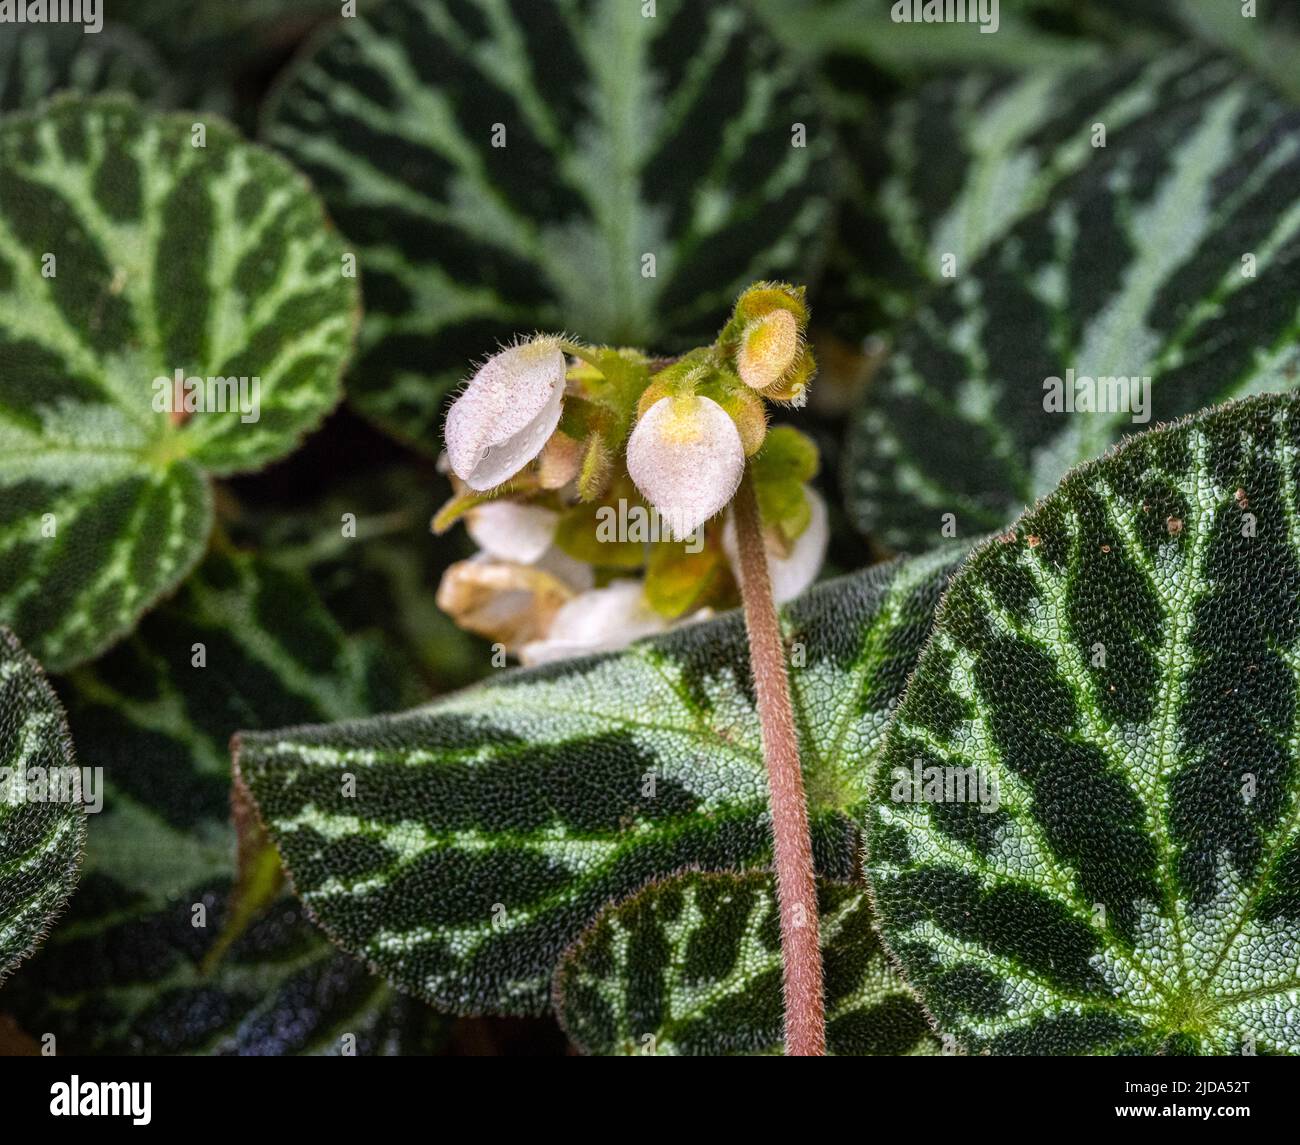 White flowers of a begonia pustulata against its distinctive textured leaves Stock Photo